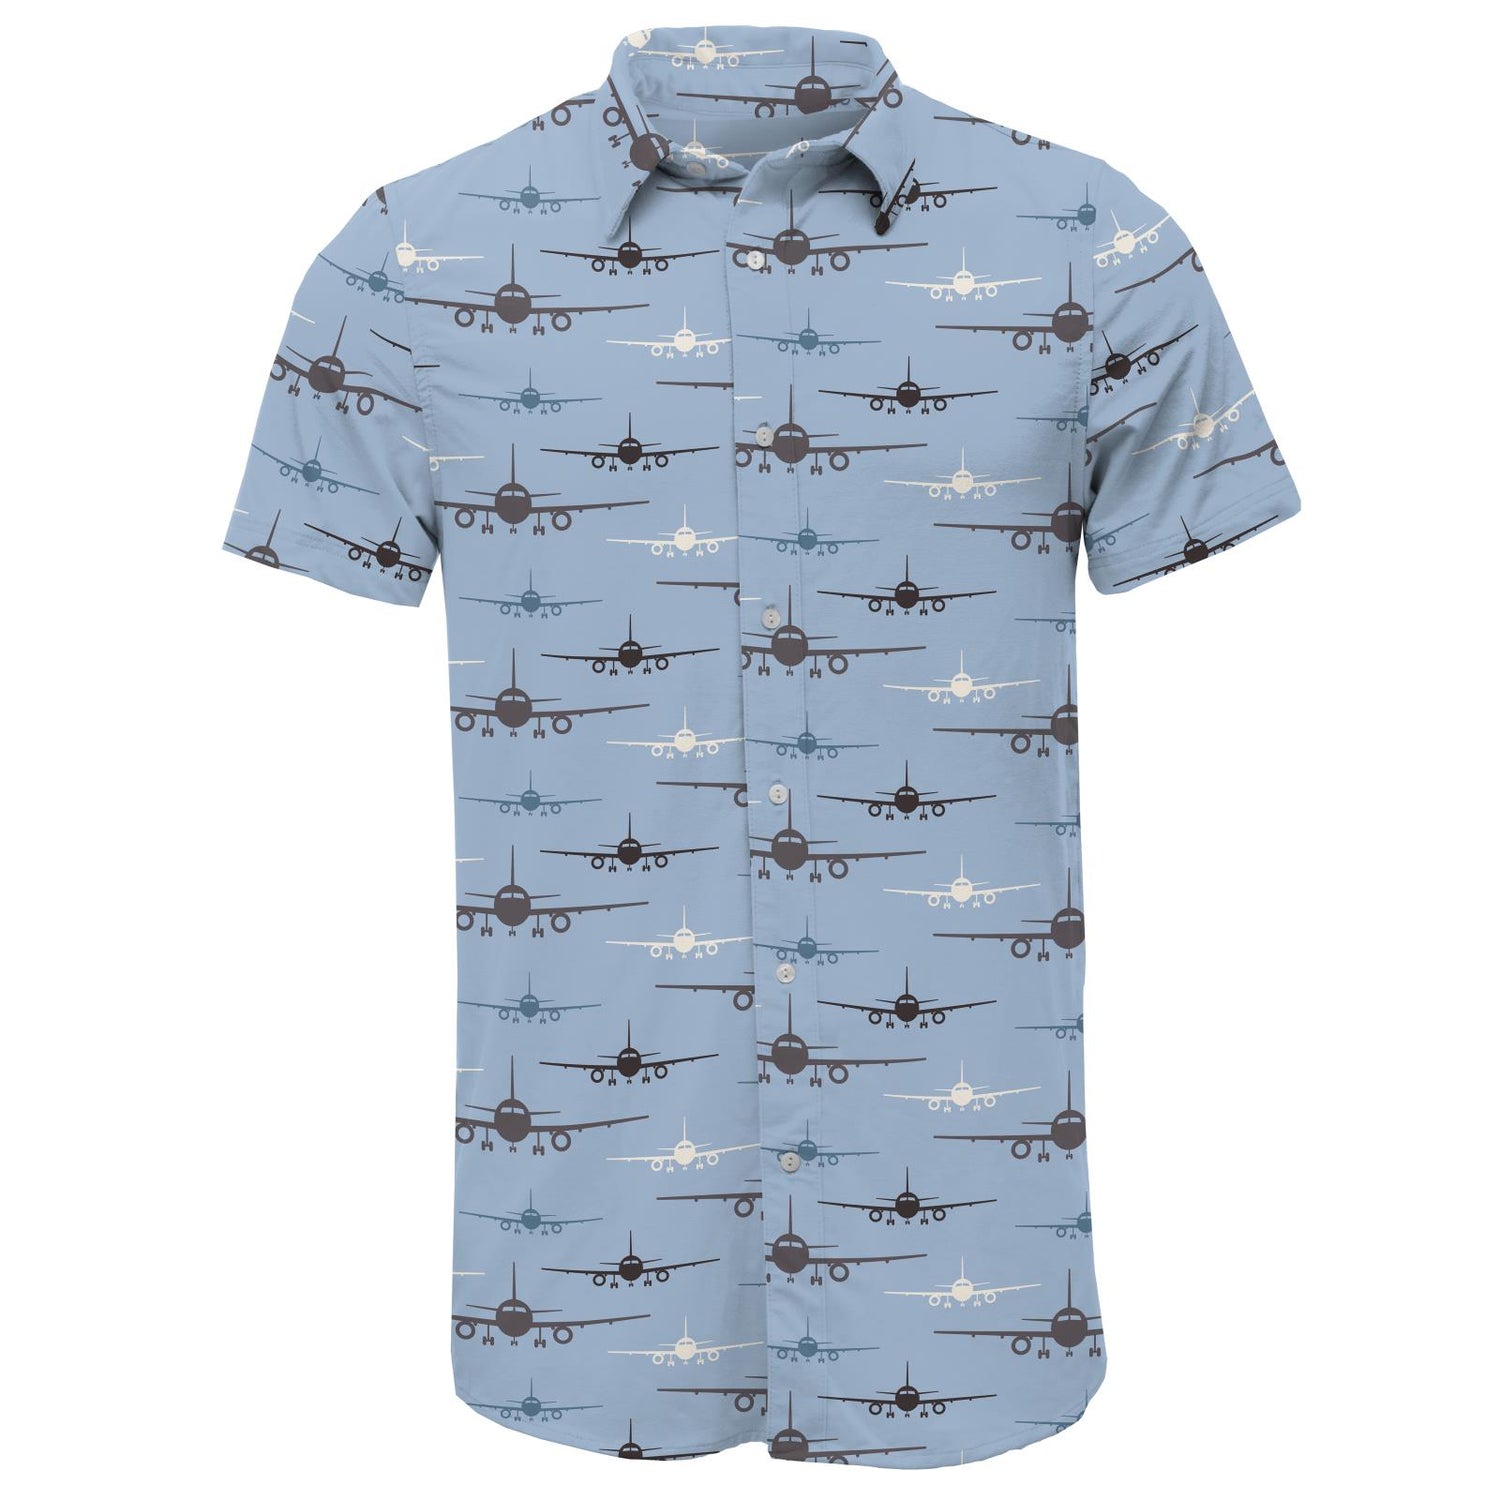 Men's Print Short Sleeve Woven Button Down Shirt in Pond Airplanes